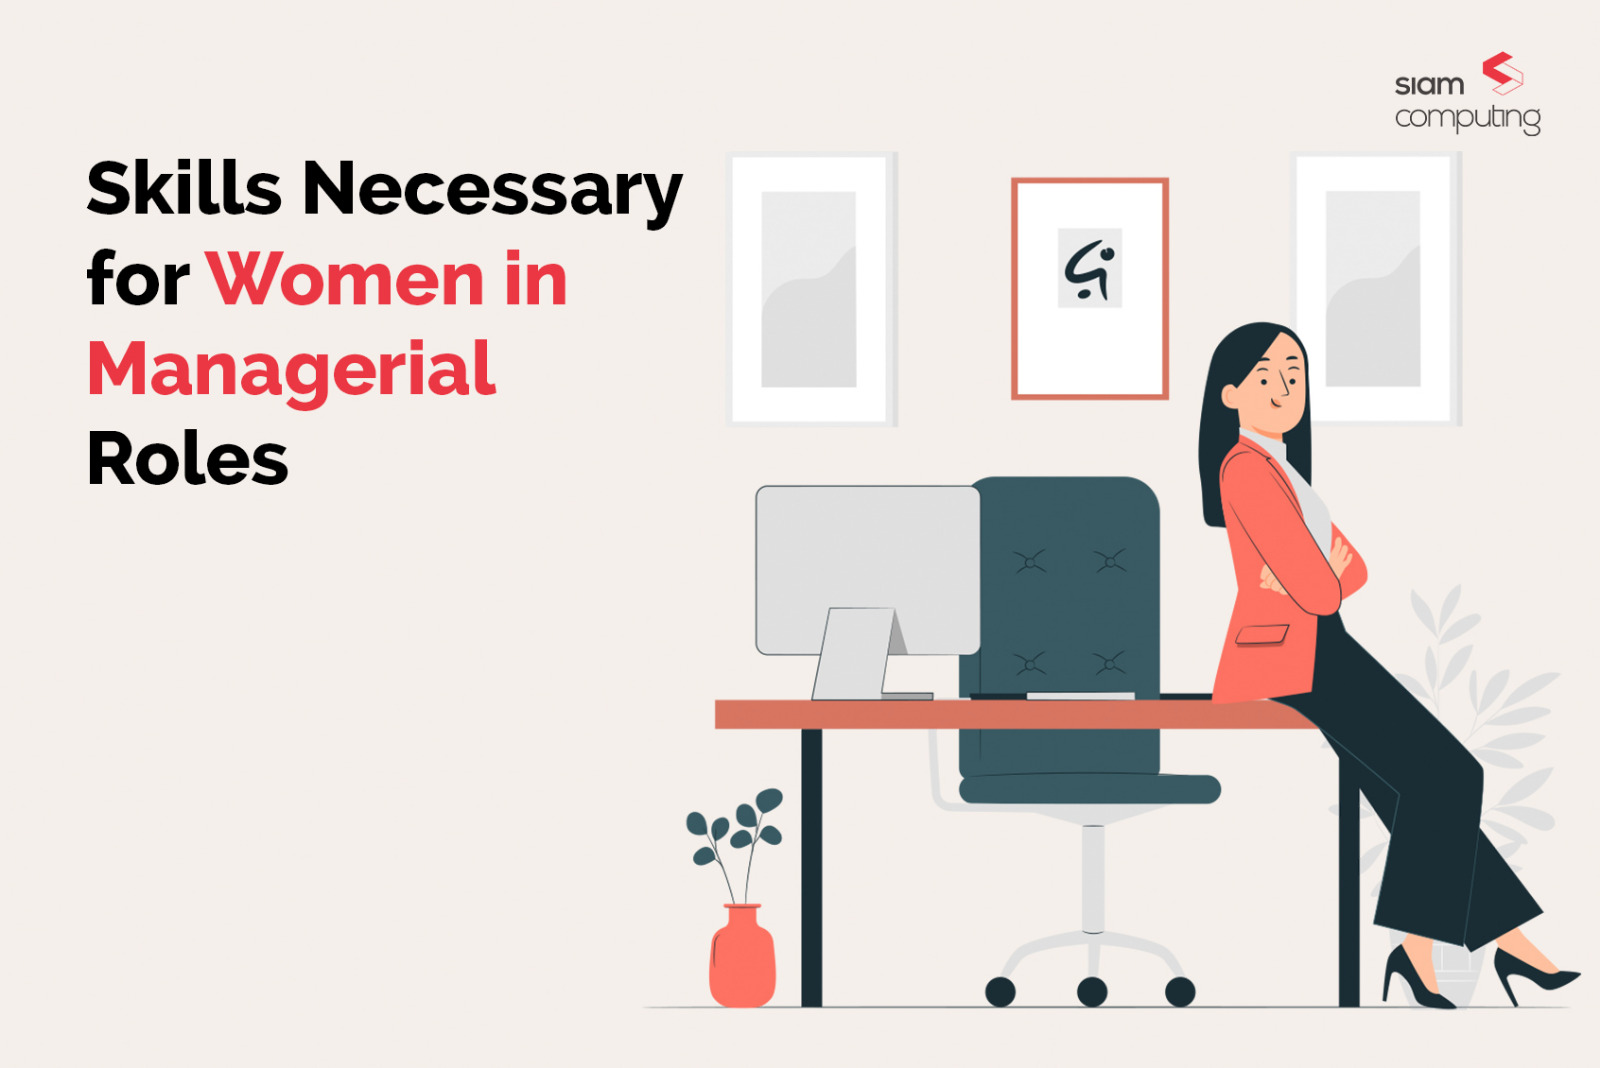 Skills Necessary for Women in Managerial Roles